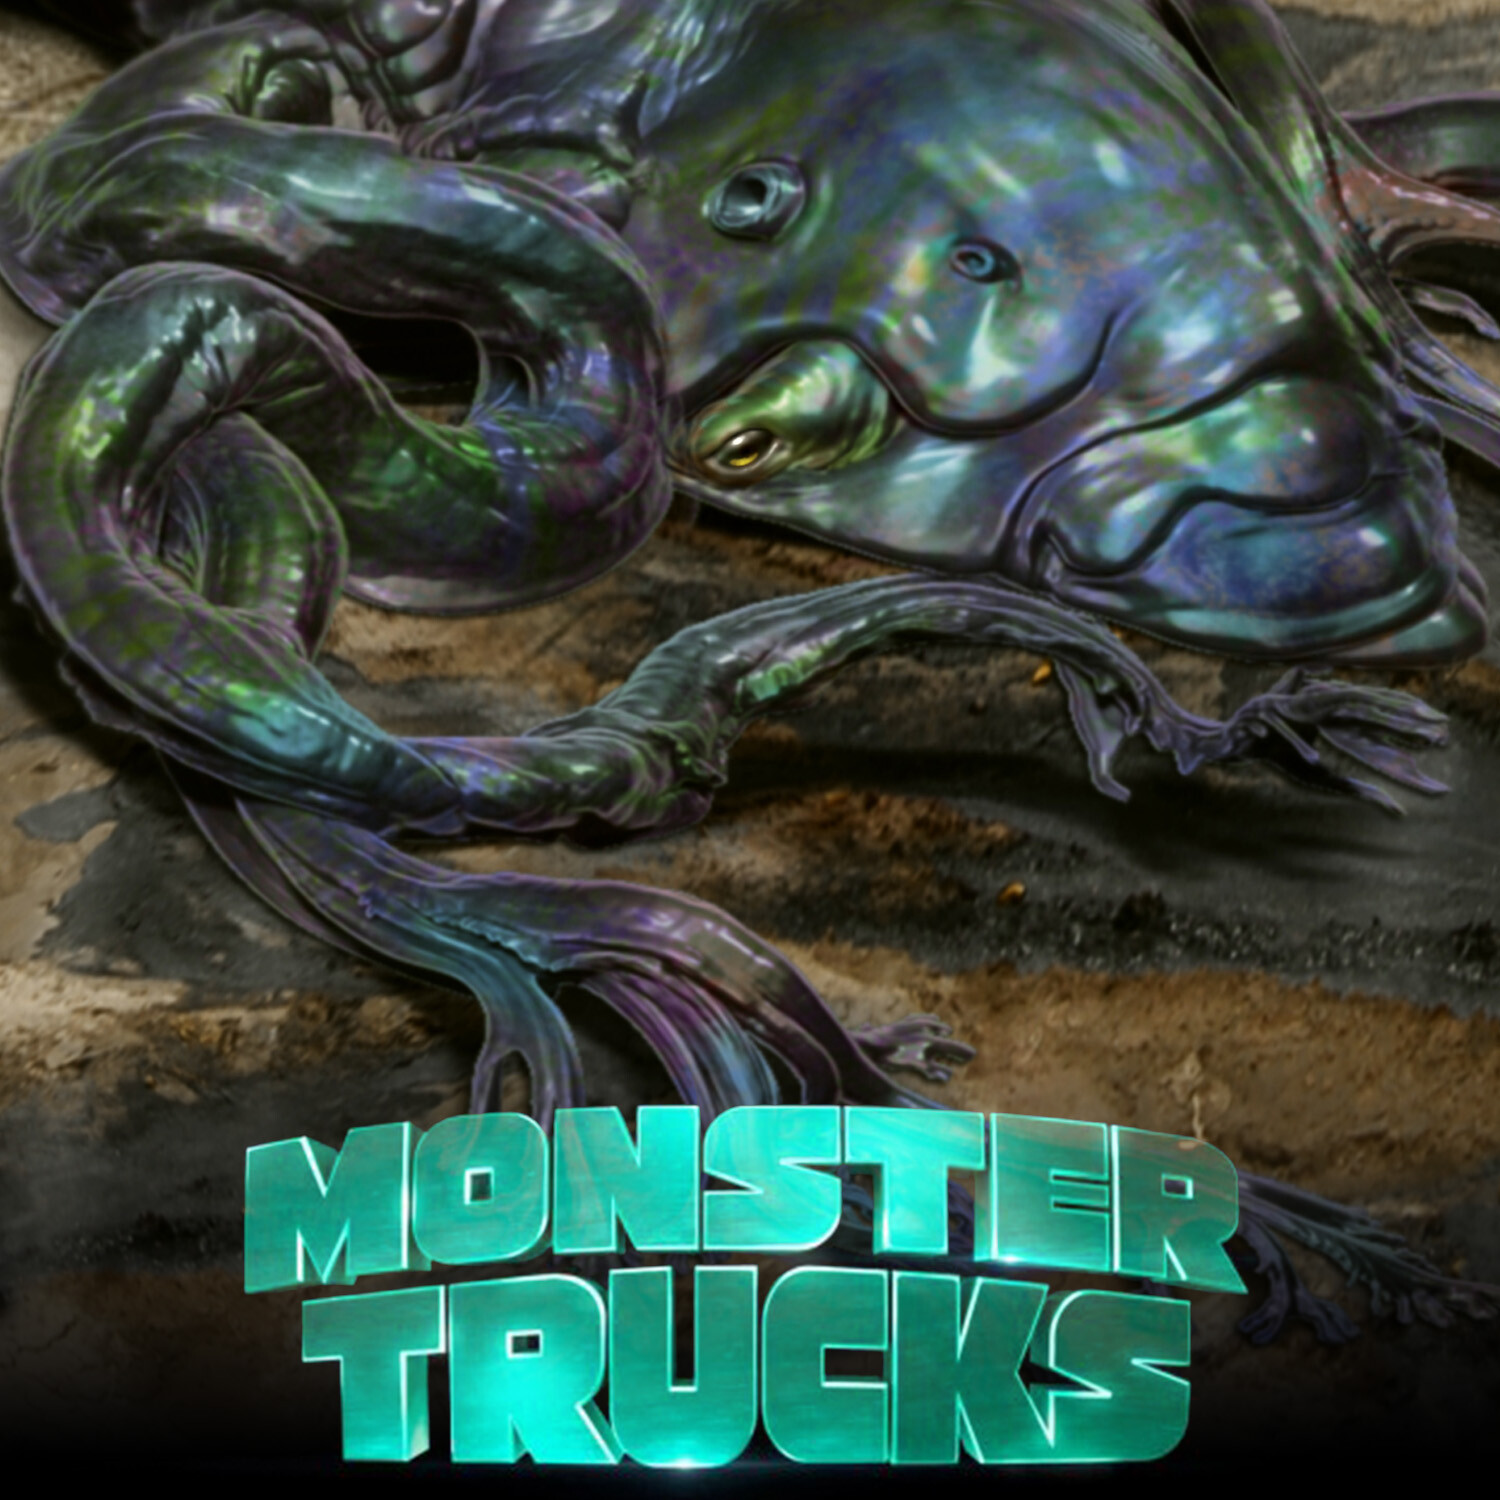 Pin by Chloee on Monster Truck Creech  Monster trucks movie, Monster trucks,  Big trucks